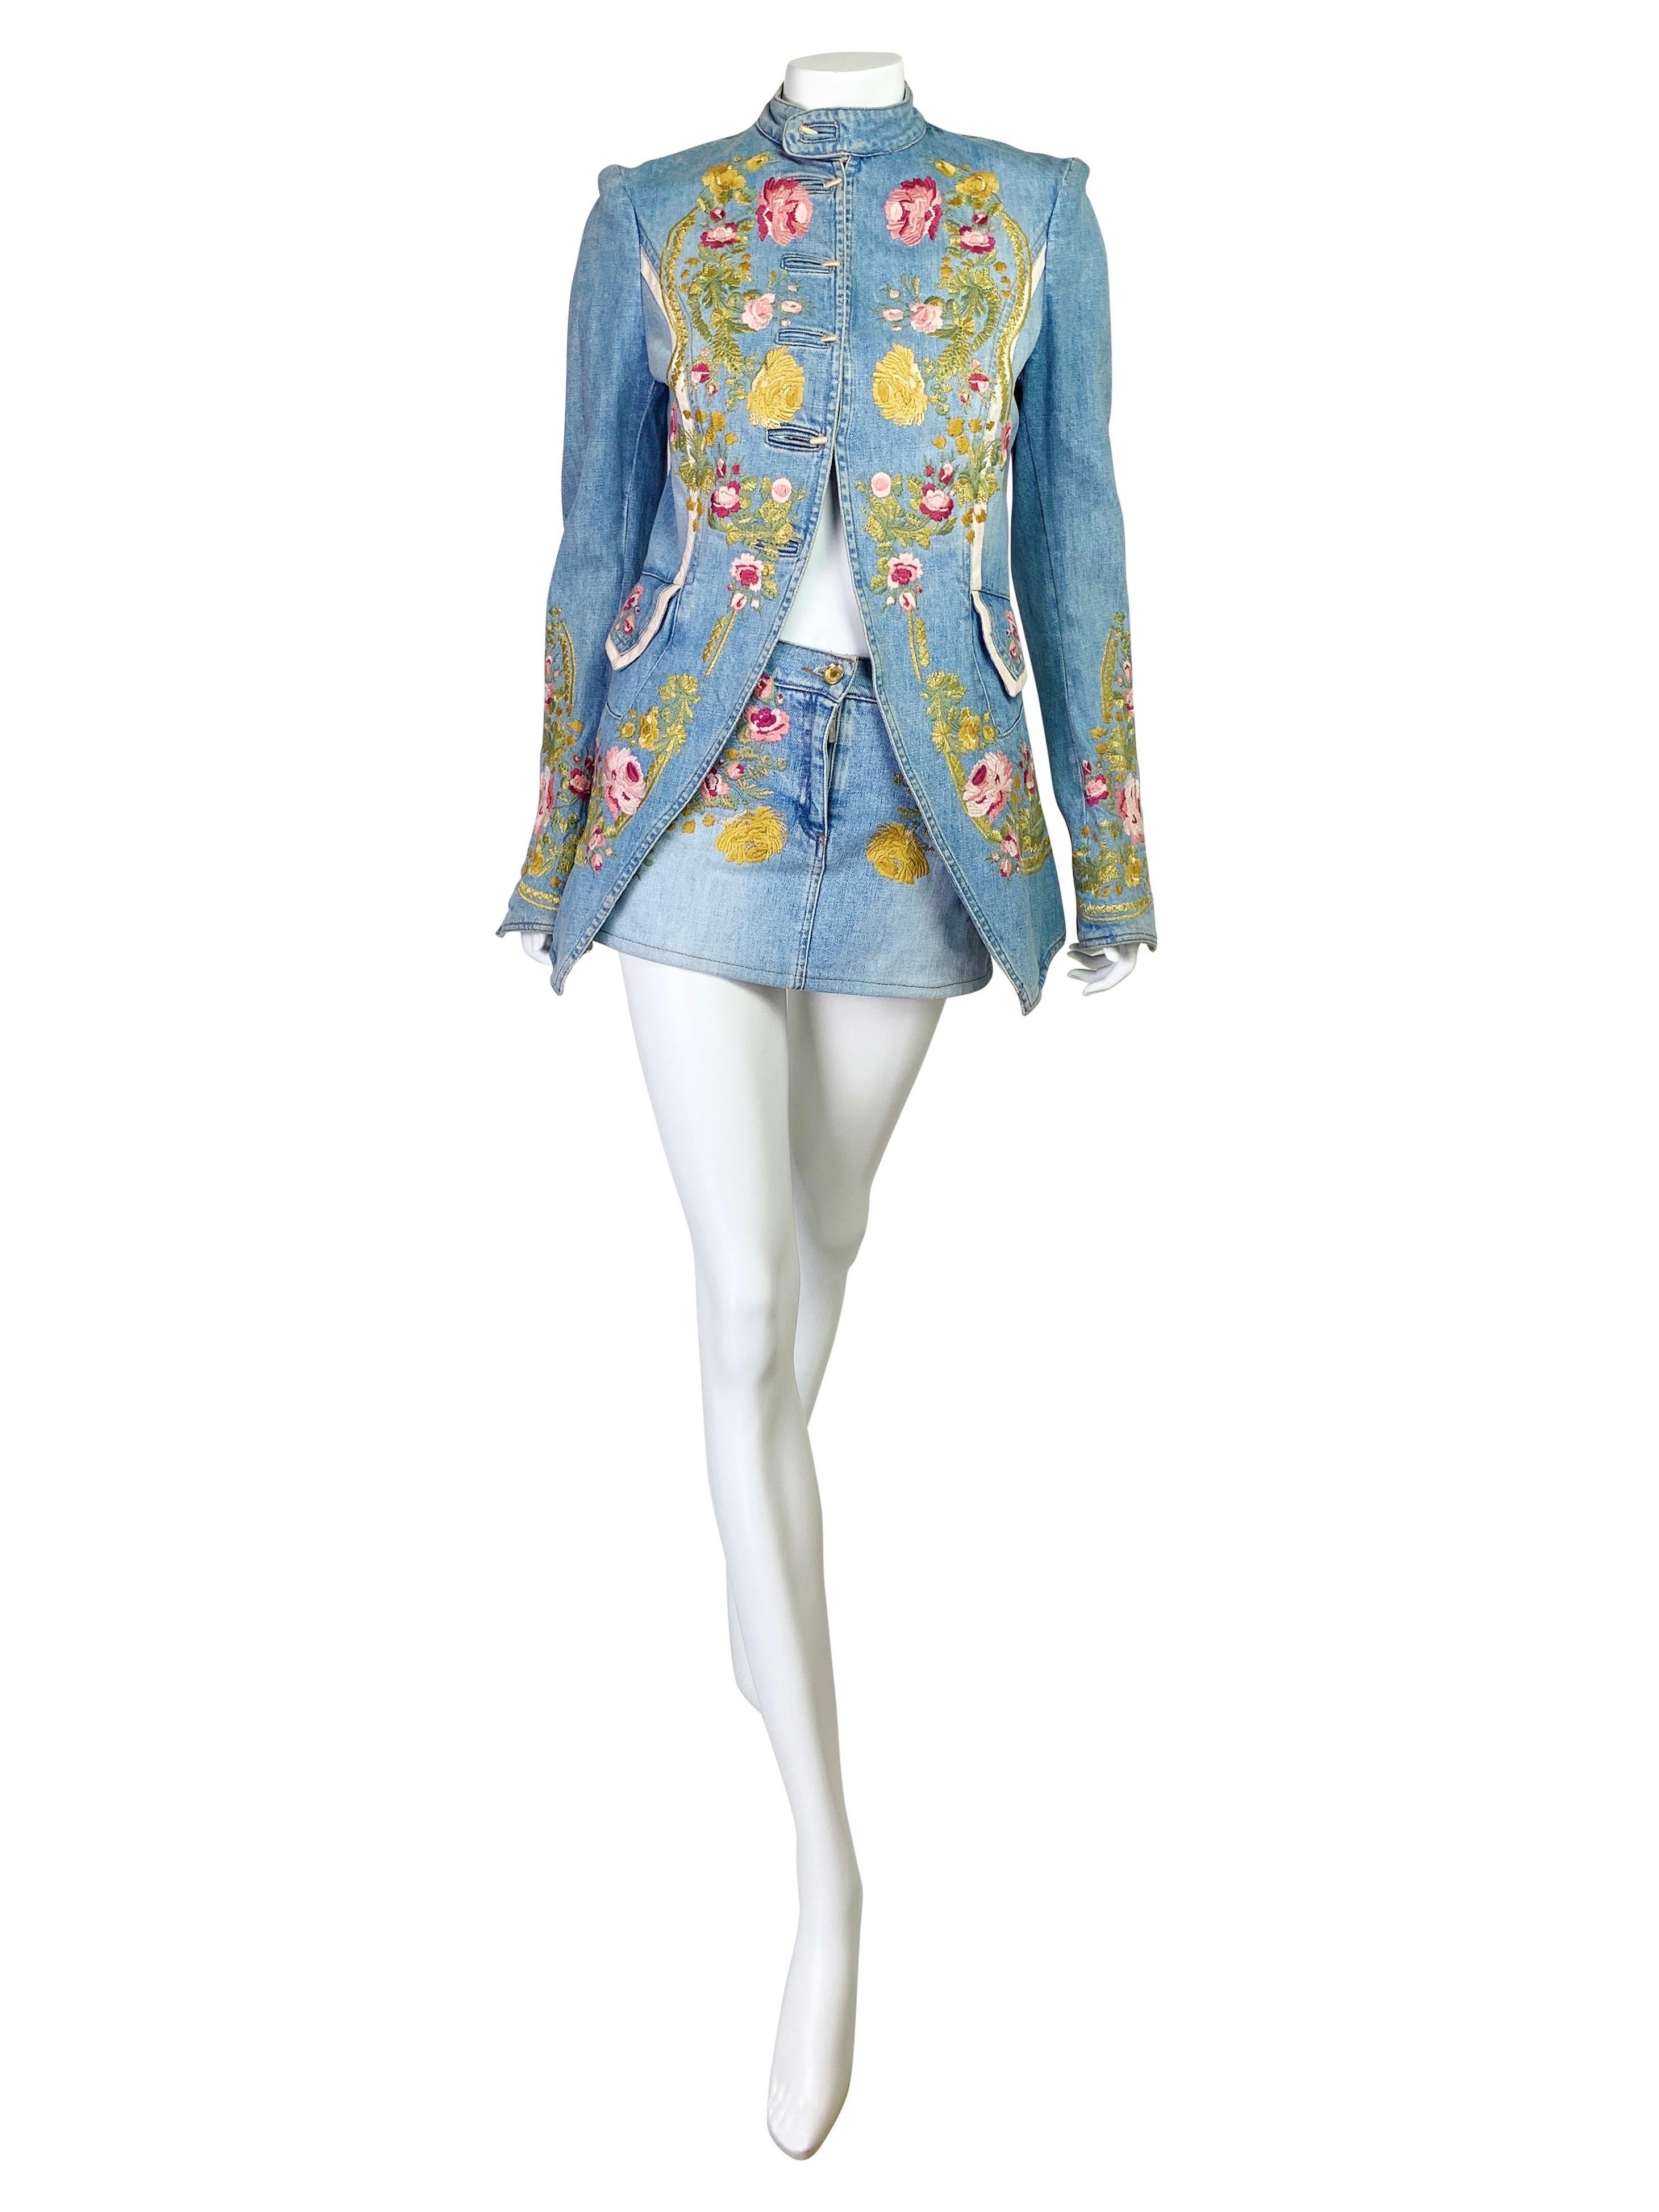 Gray Roberto Cavalli Spring 2003 Embroidered Denim Coat with Skirt